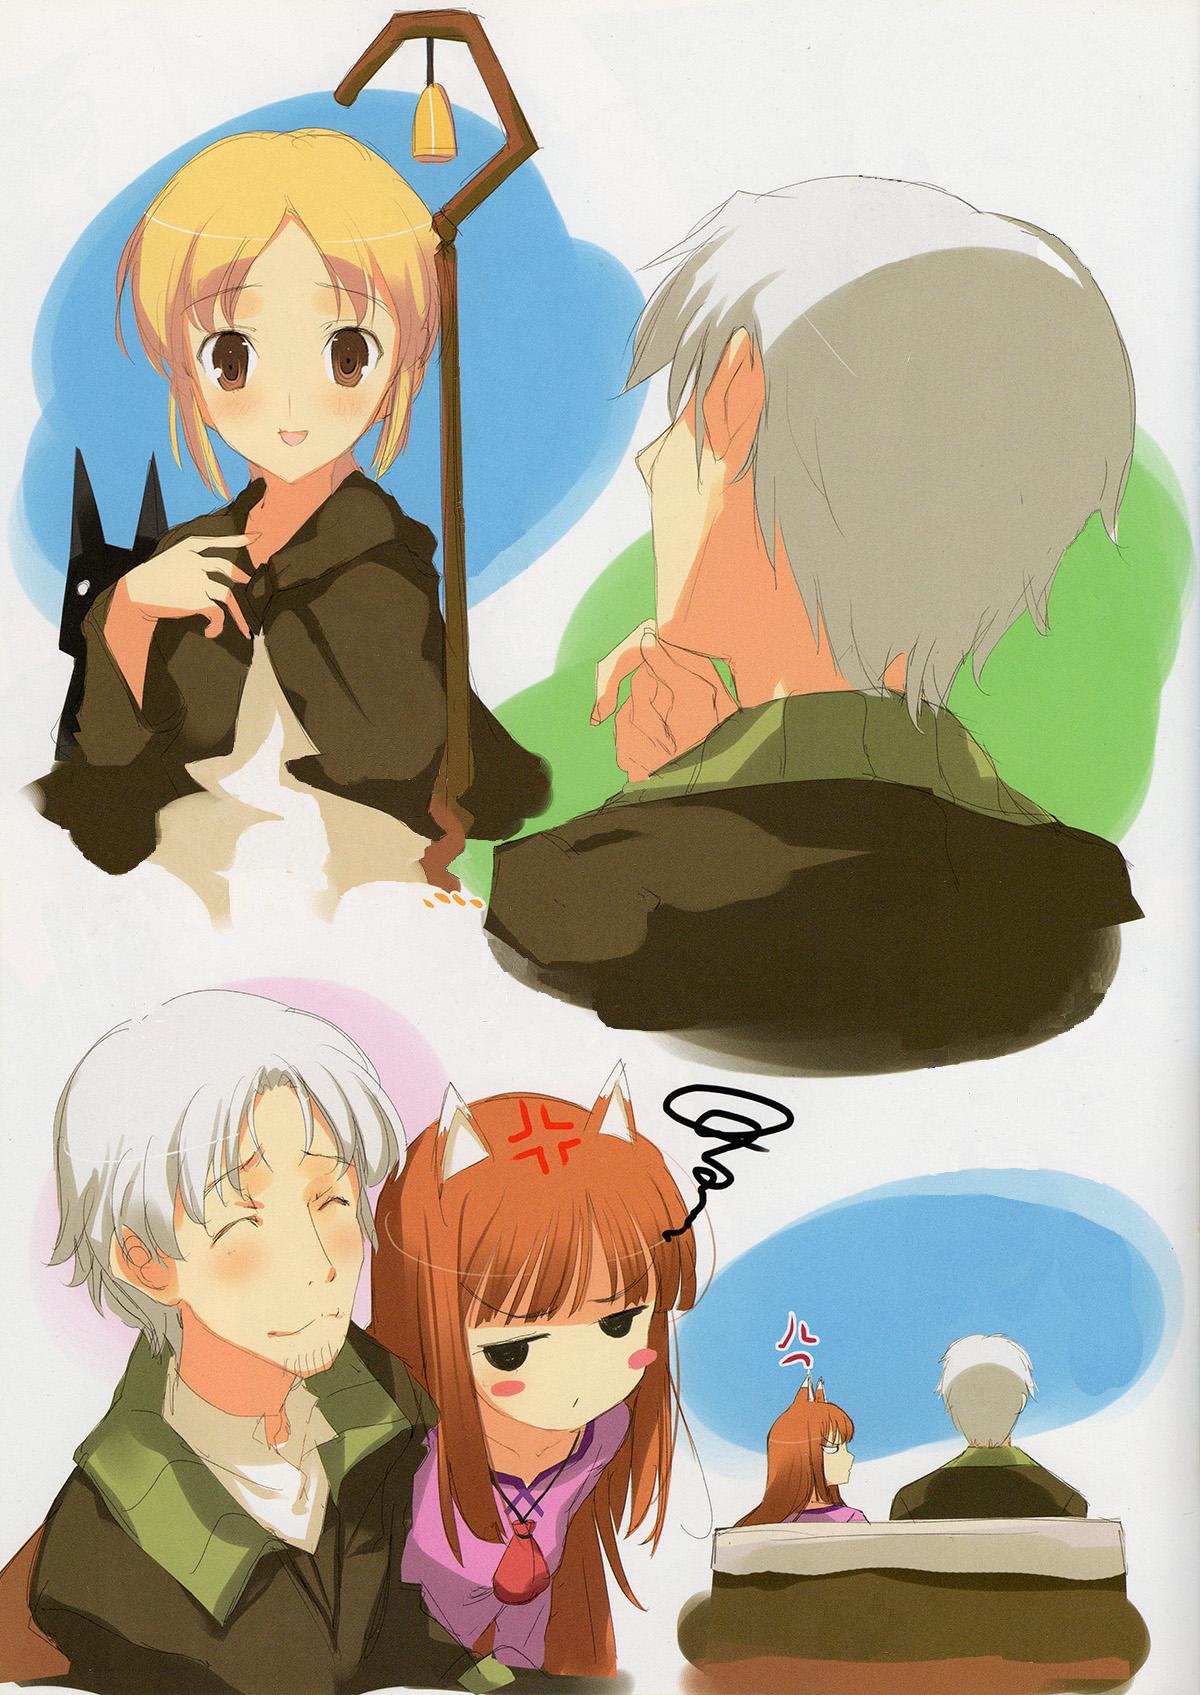 Masseuse Ookami no Kimagure Hon - Spice and wolf Cam - Page 4